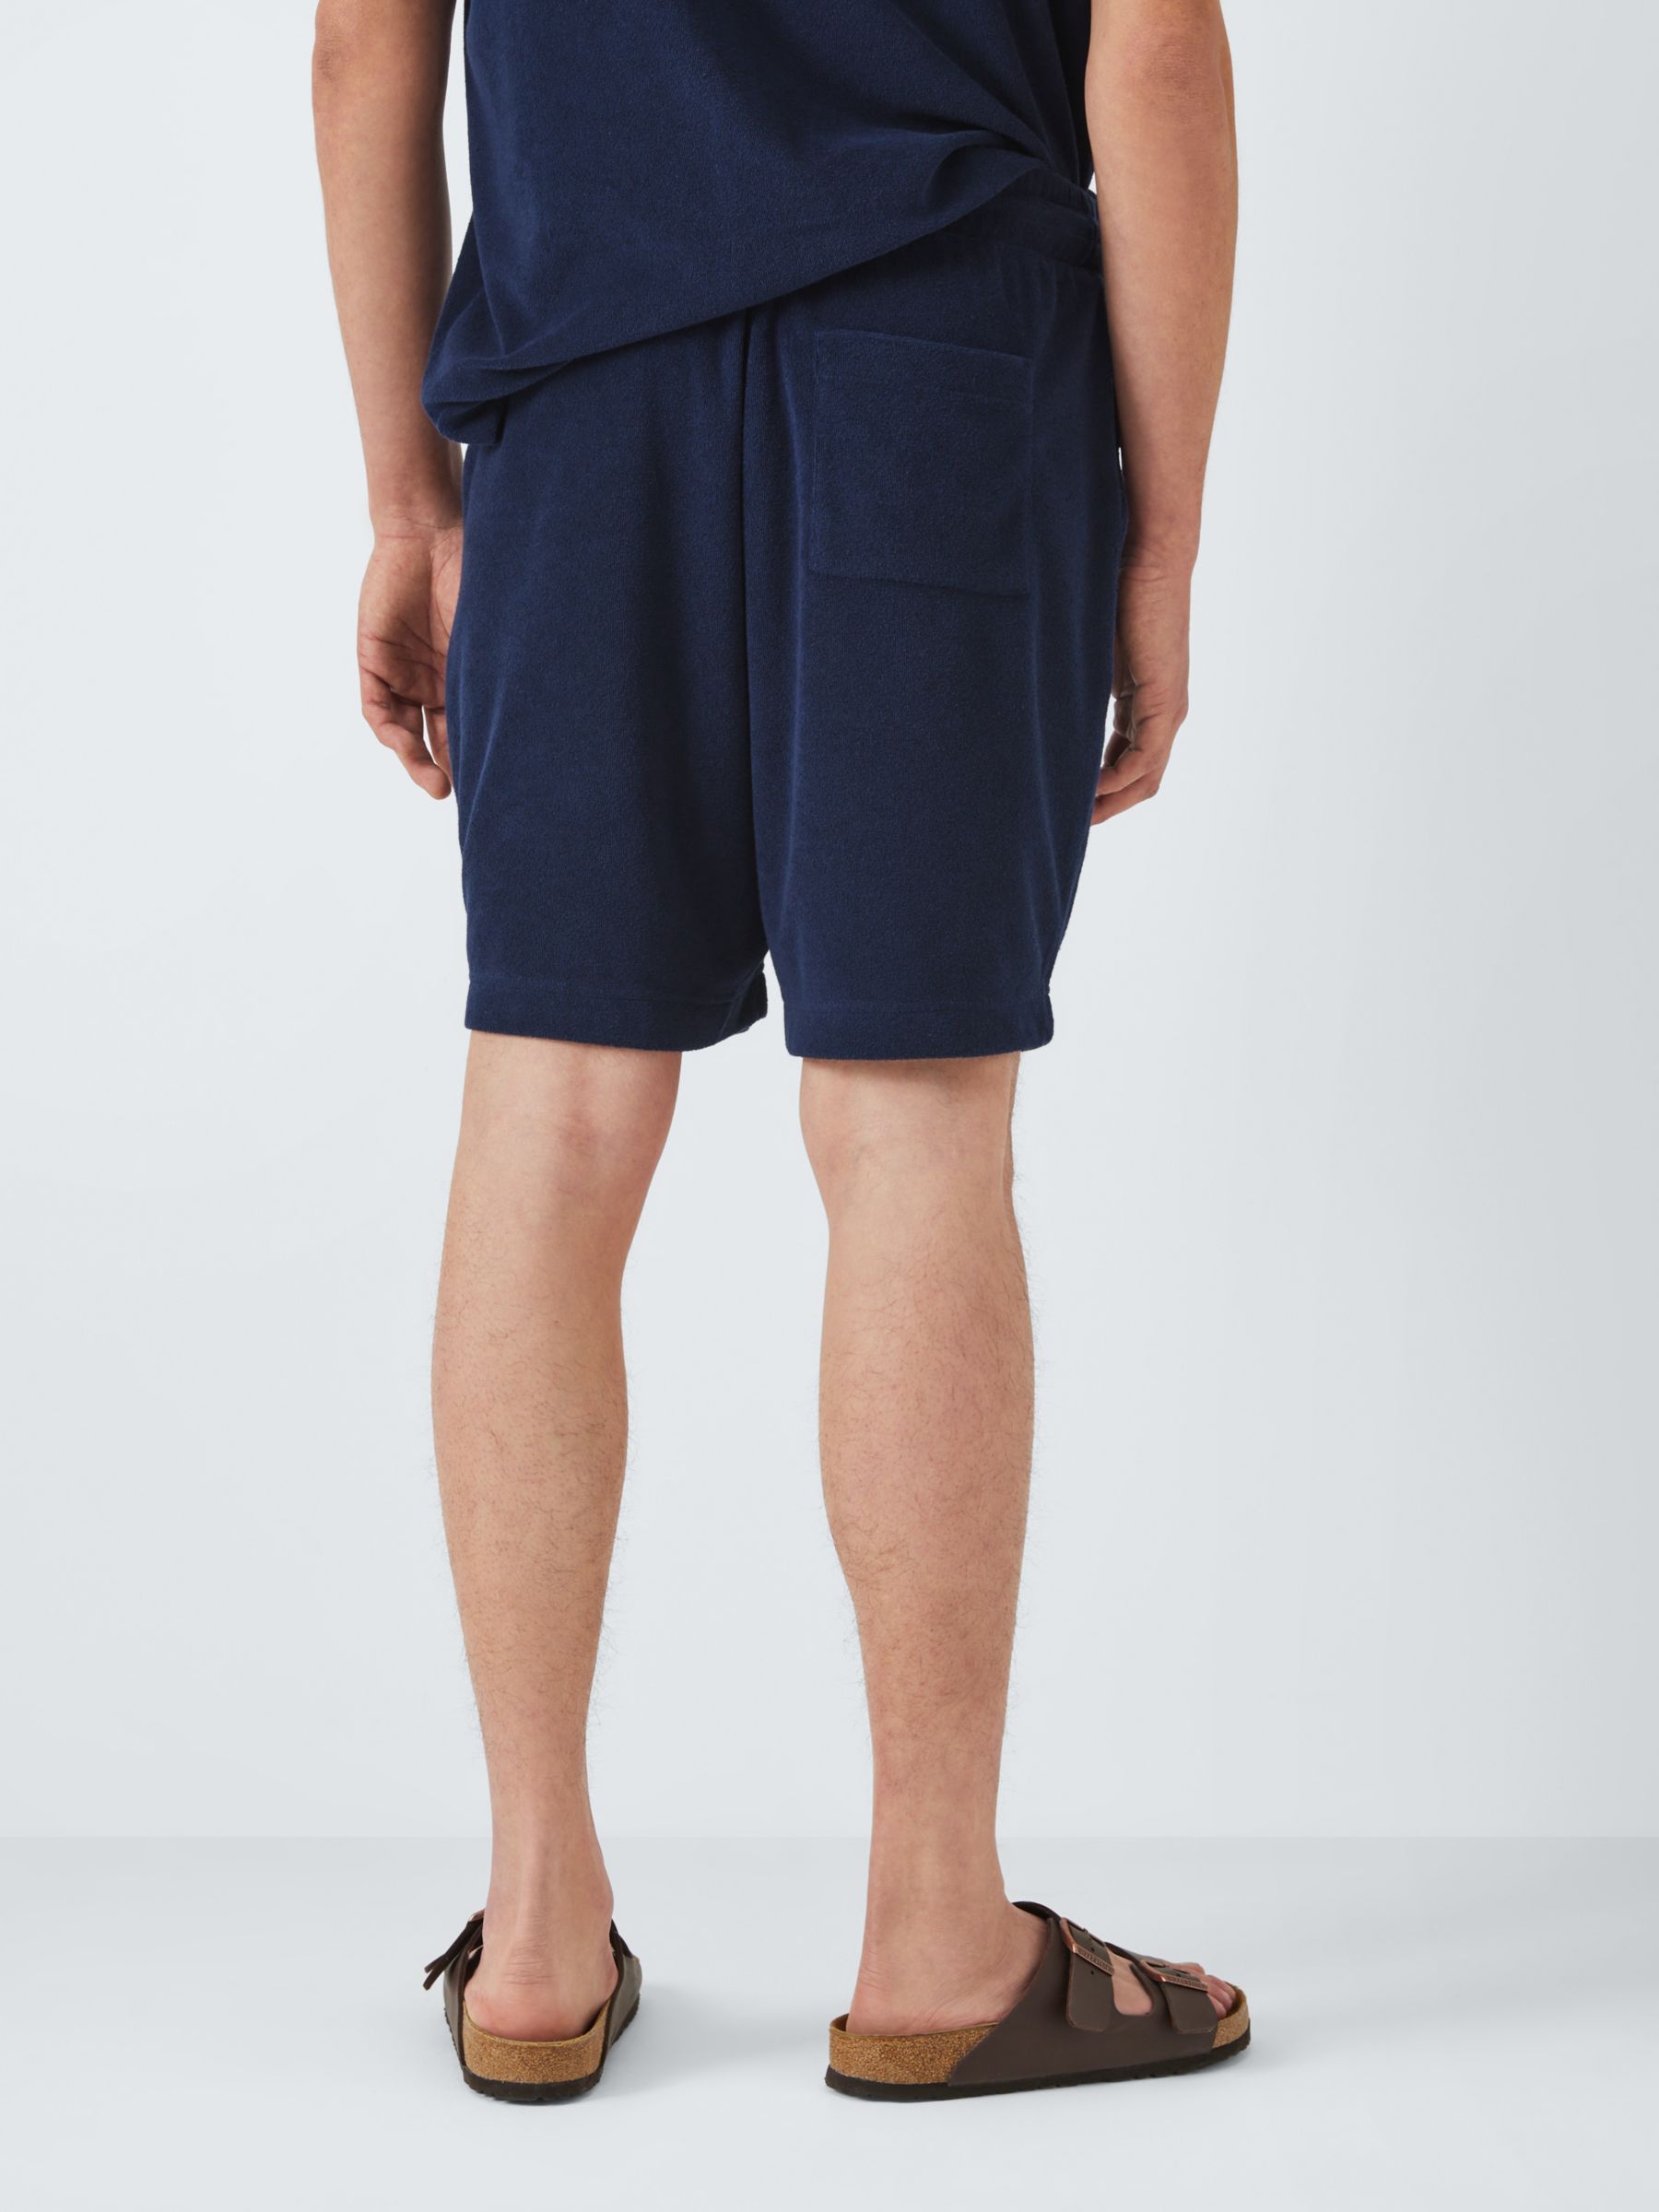 John Lewis ANYDAY Towelling Shorts, Navy, M